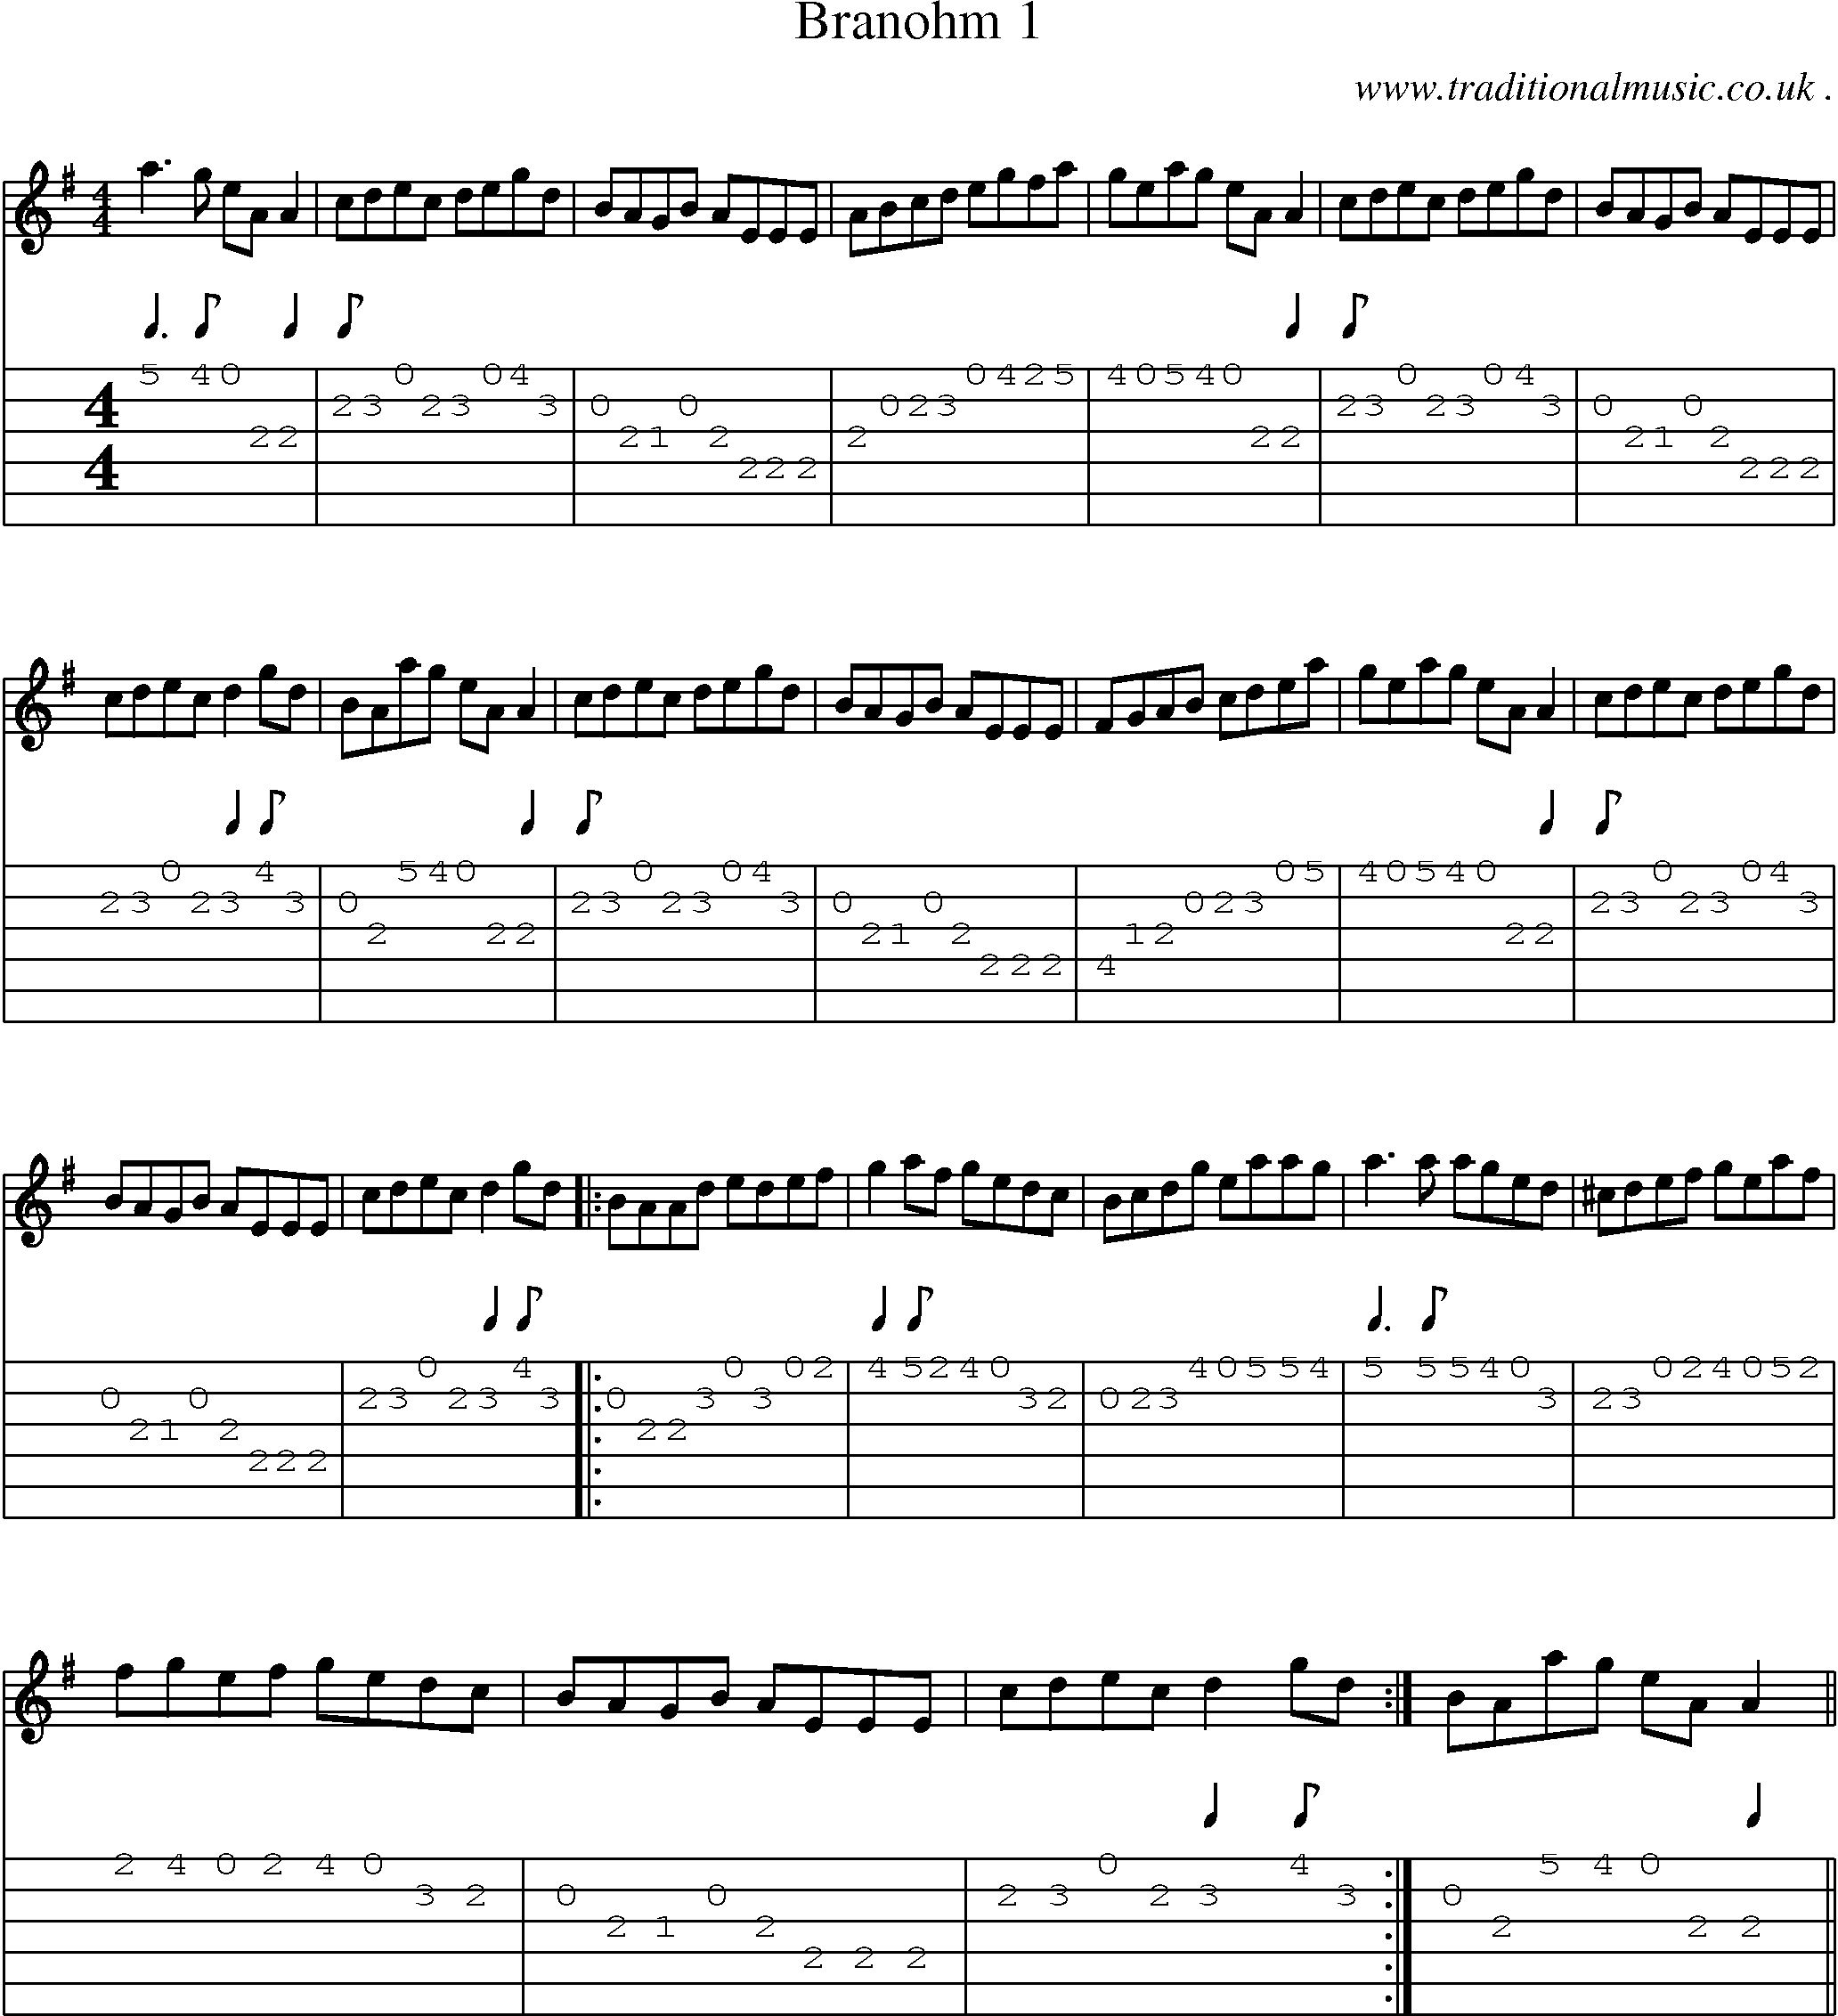 Sheet-Music and Guitar Tabs for Branohm 1